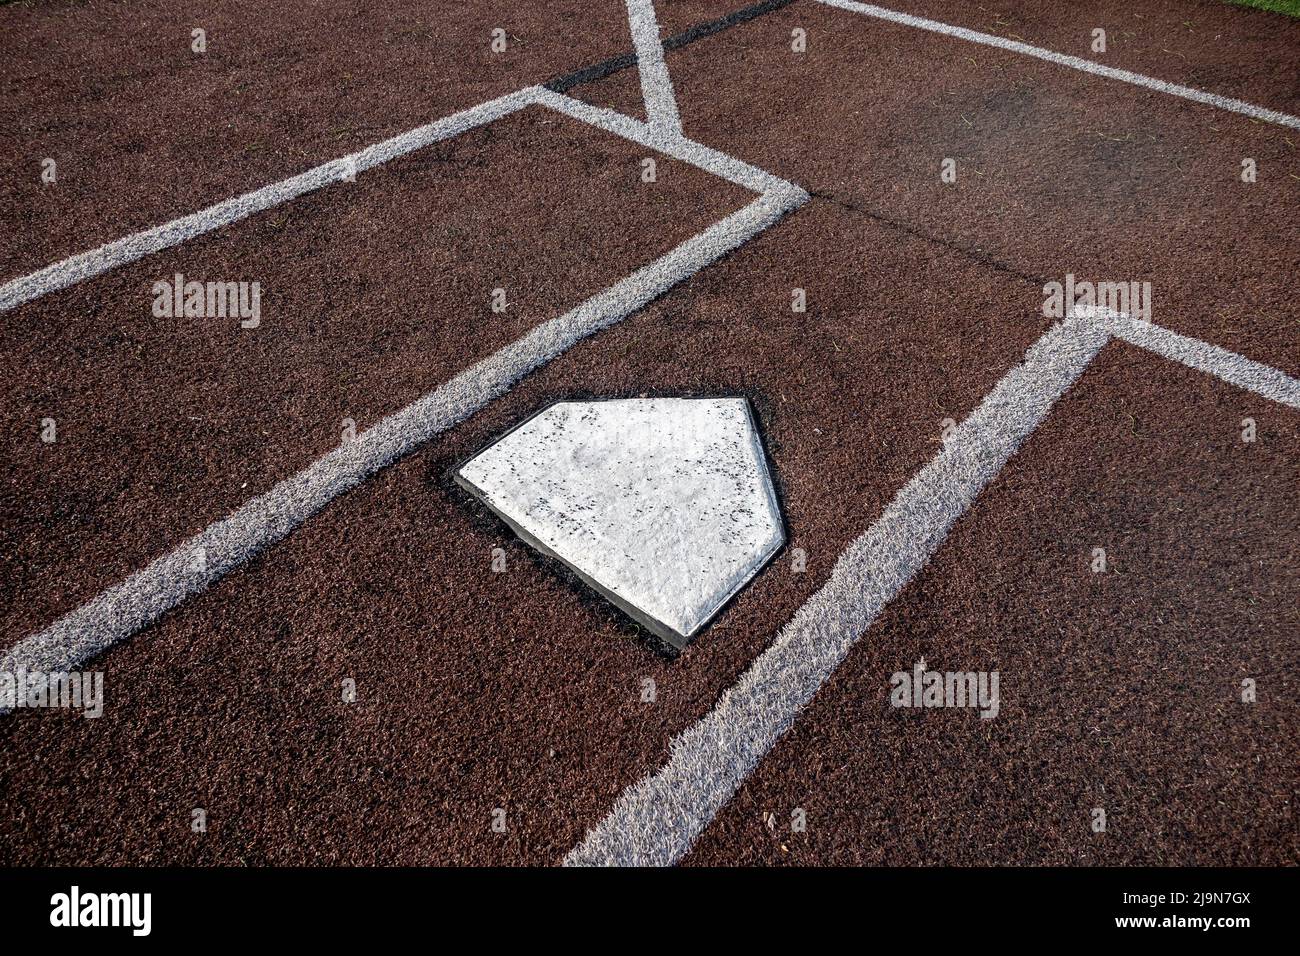 Top down, close up view of home base on a baseball field Stock Photo